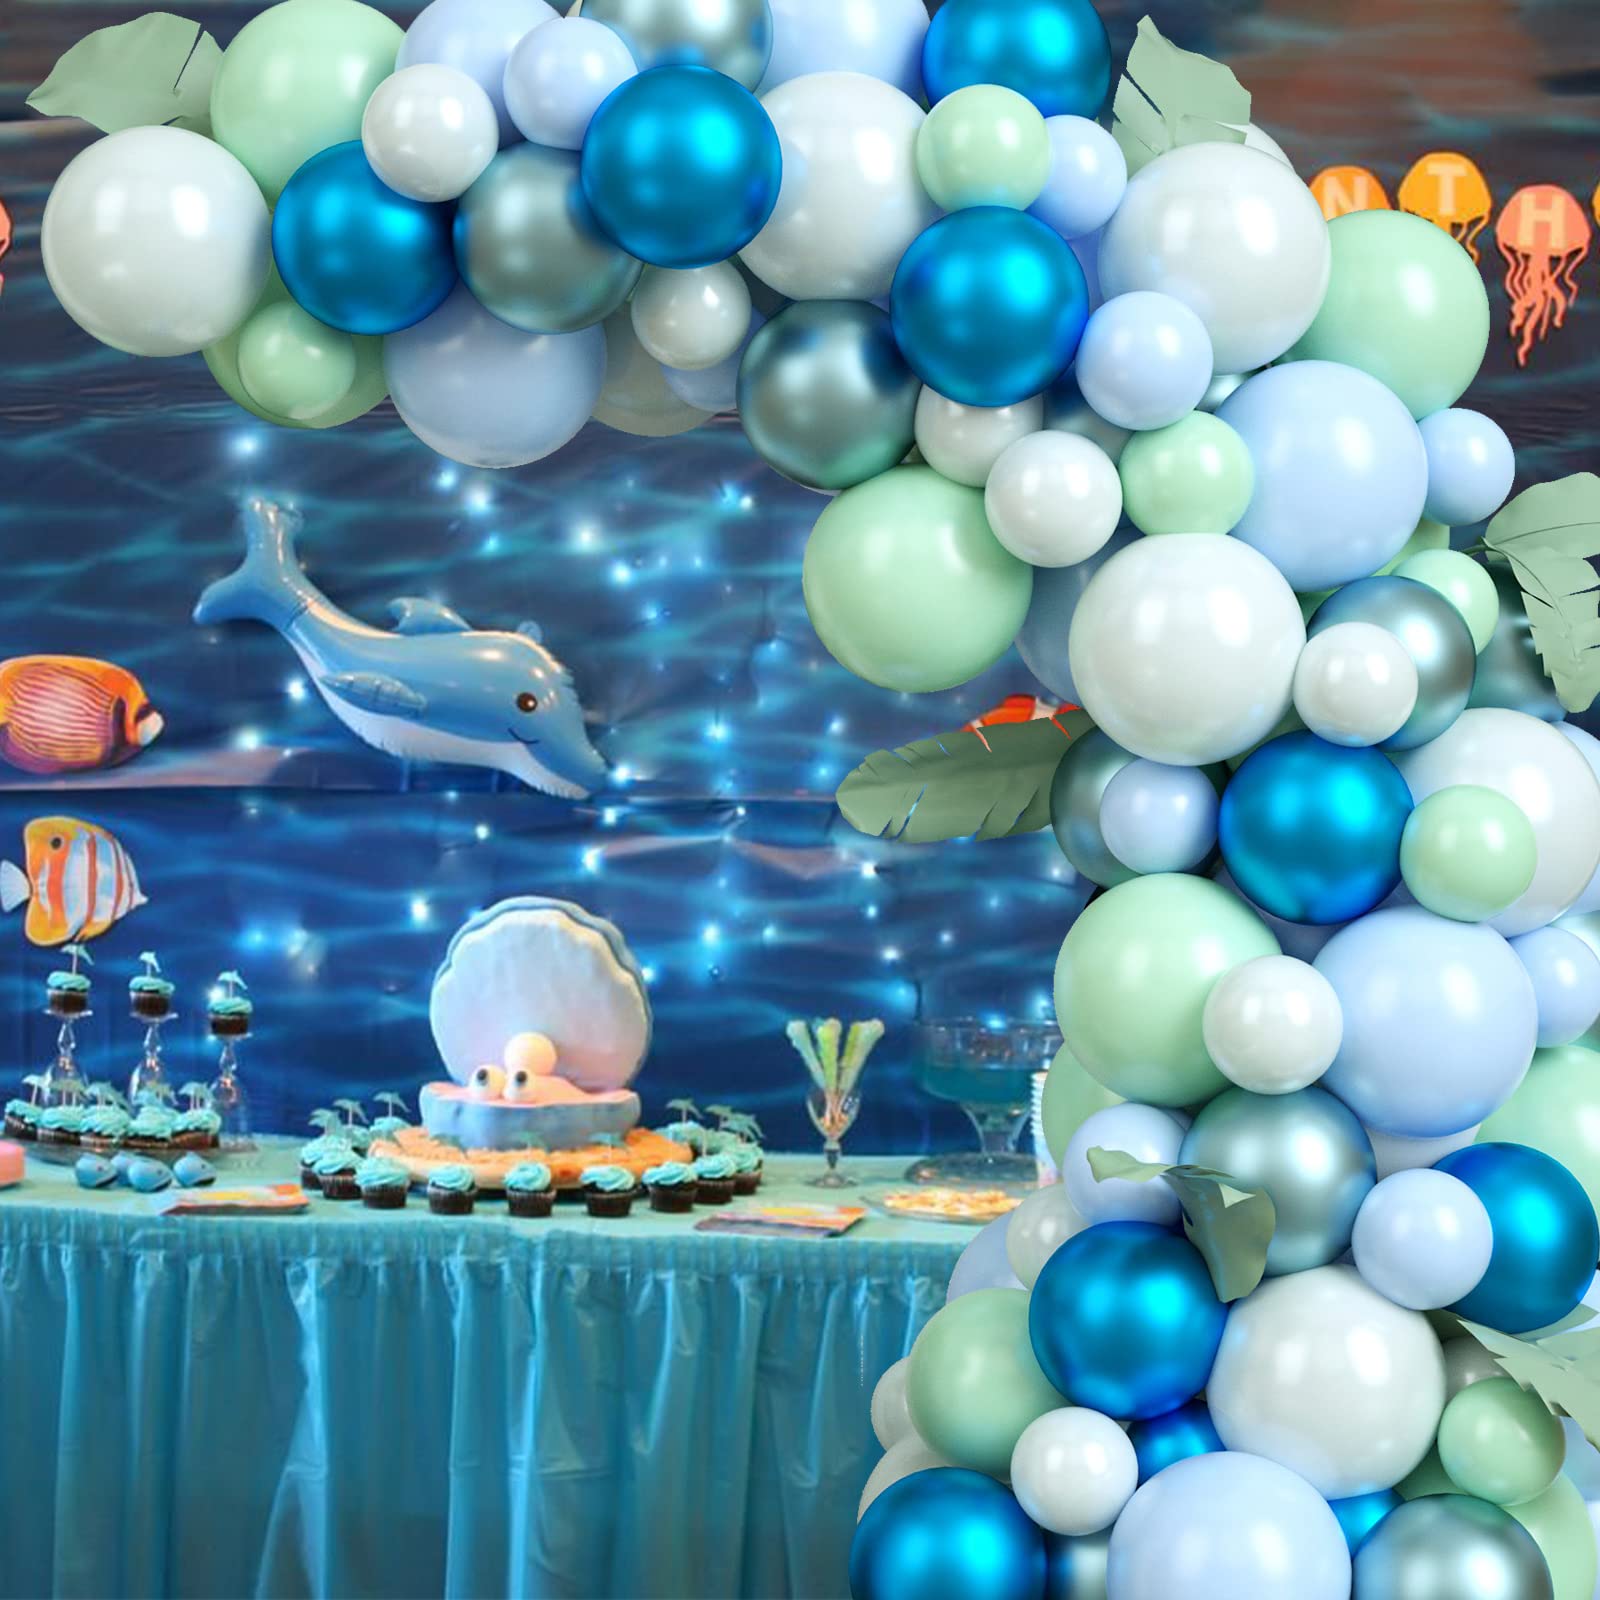 Balloon Garland Kit Green Blue White Balloons Ocean Balloon Arch Kit Under the Sea Party Decorations for Kids Baby Shower Birthday Shark Whale Theme Party